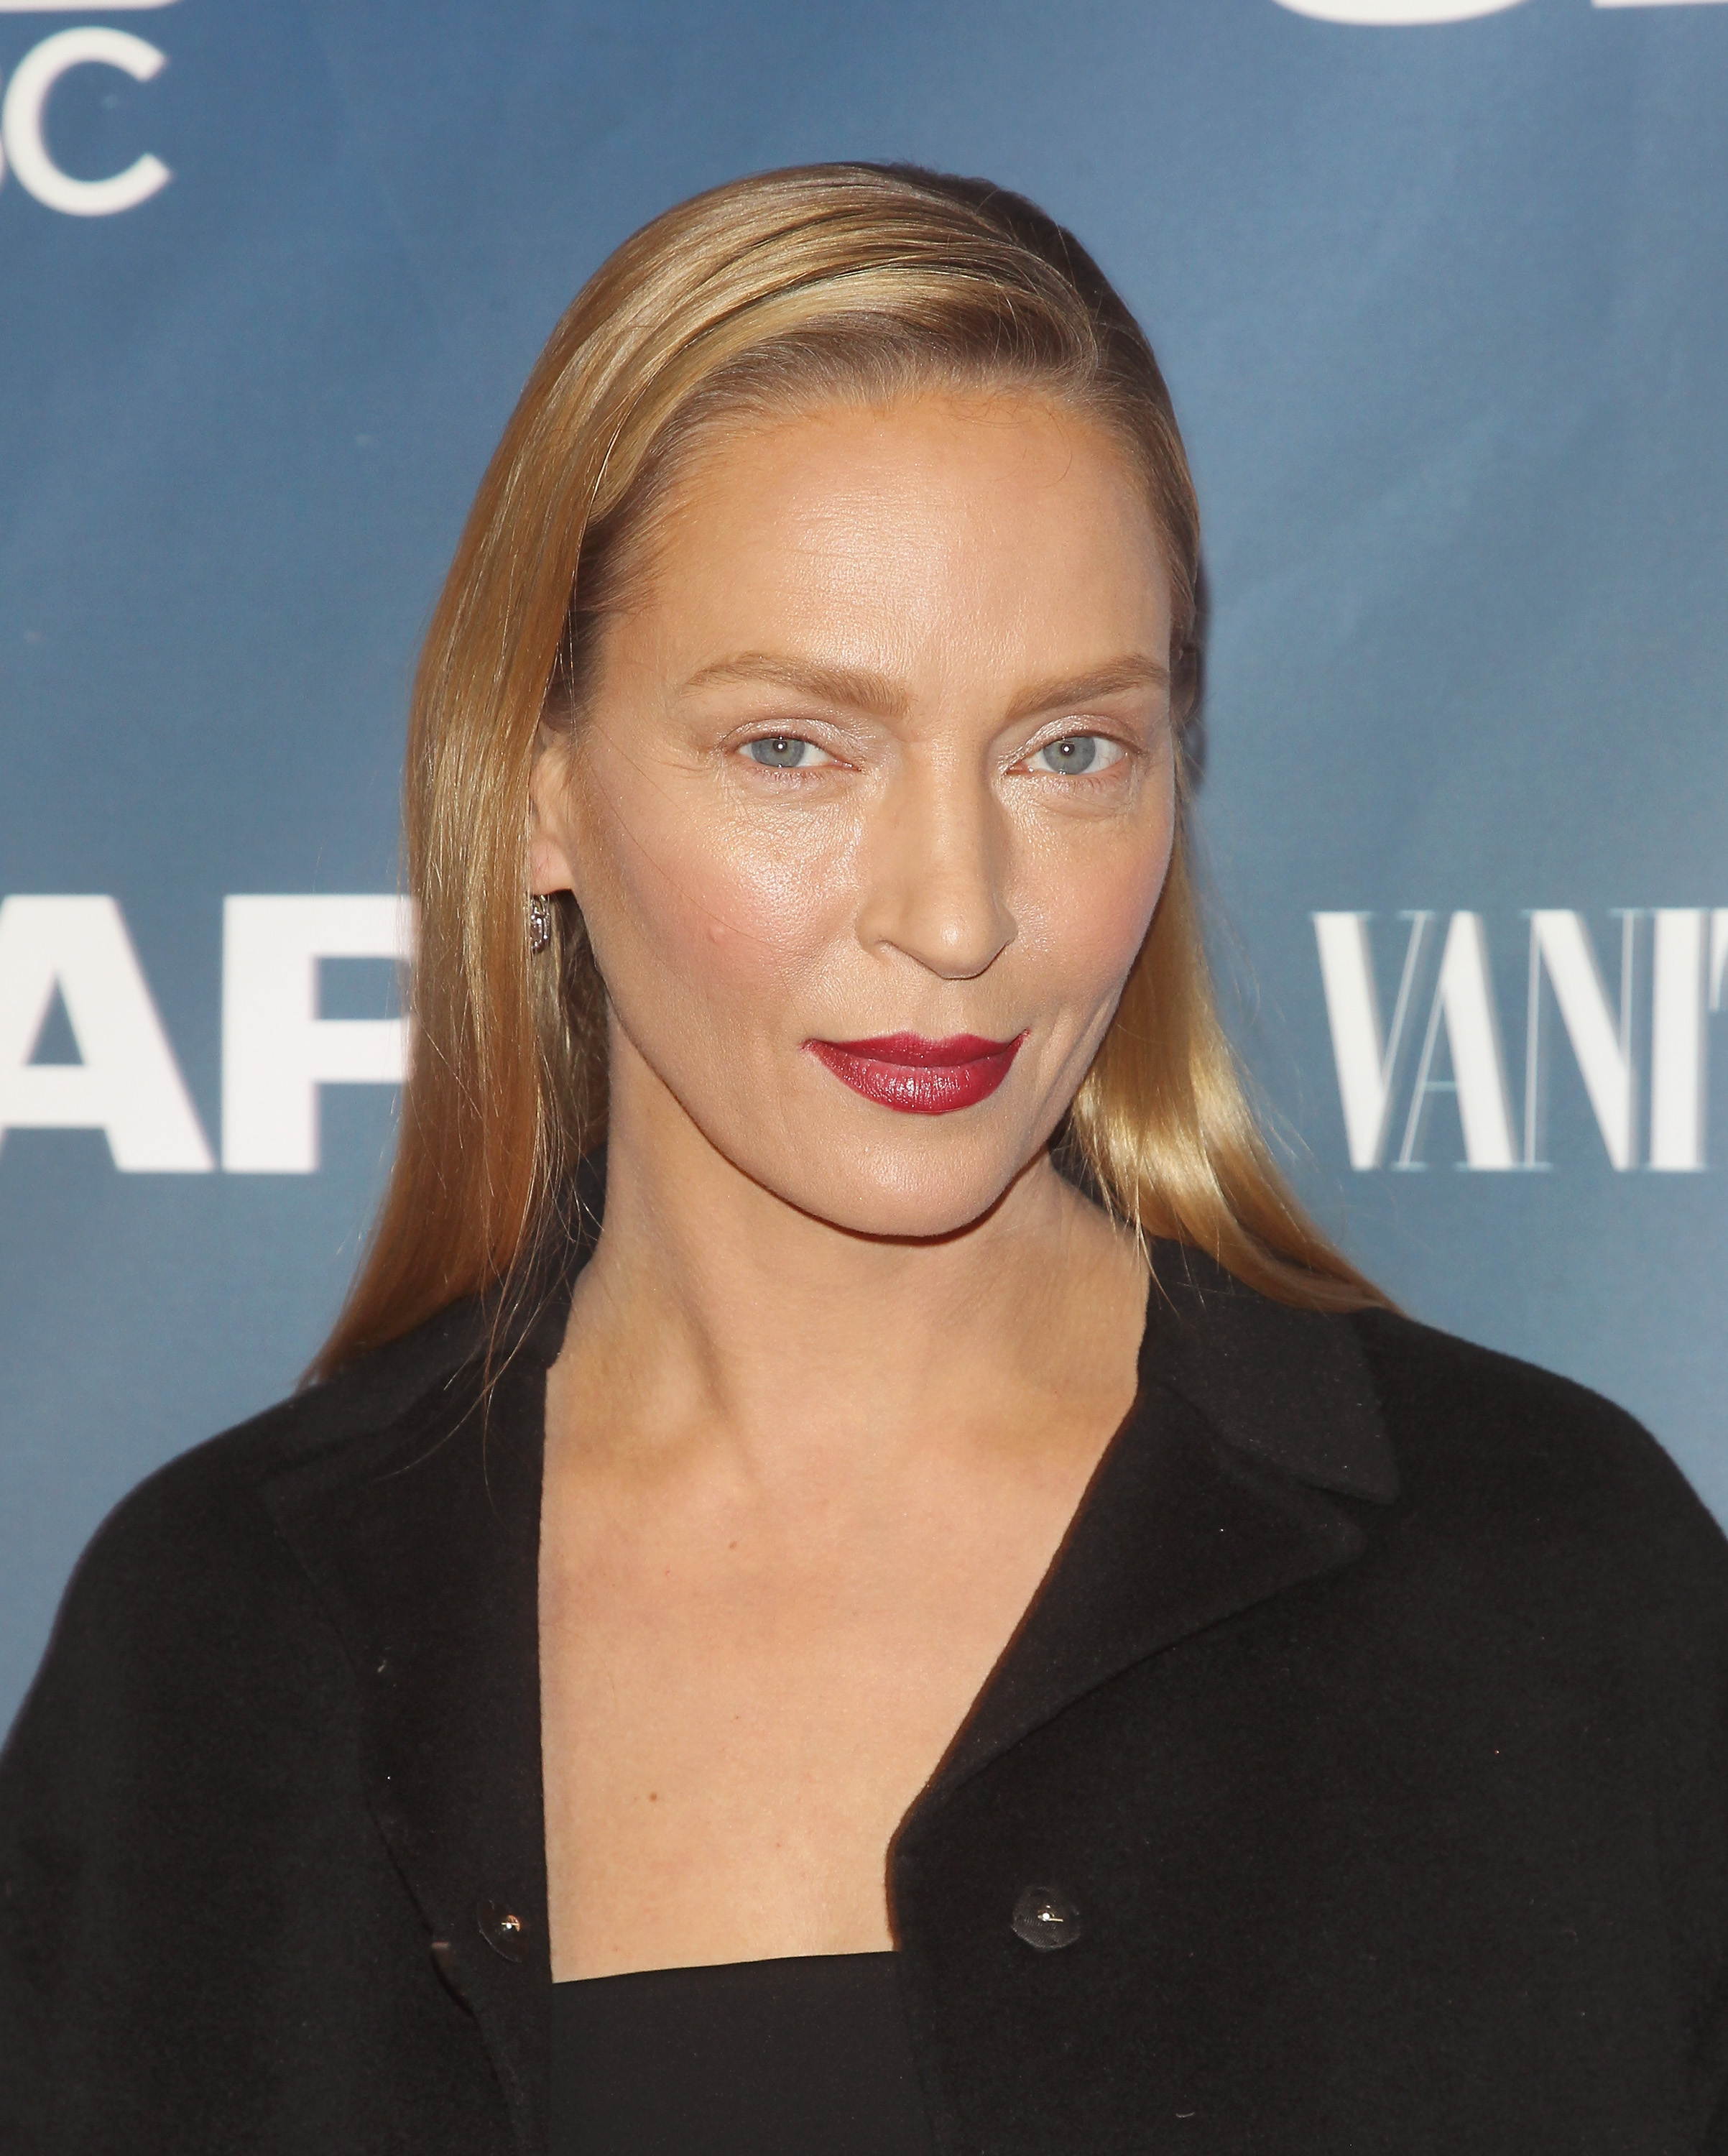 Actress Uma Thurman attends "The Slap" premiere party at The New Museum on Feb. 9, 2015 in New York City. (Jim Spellman—WireImage)